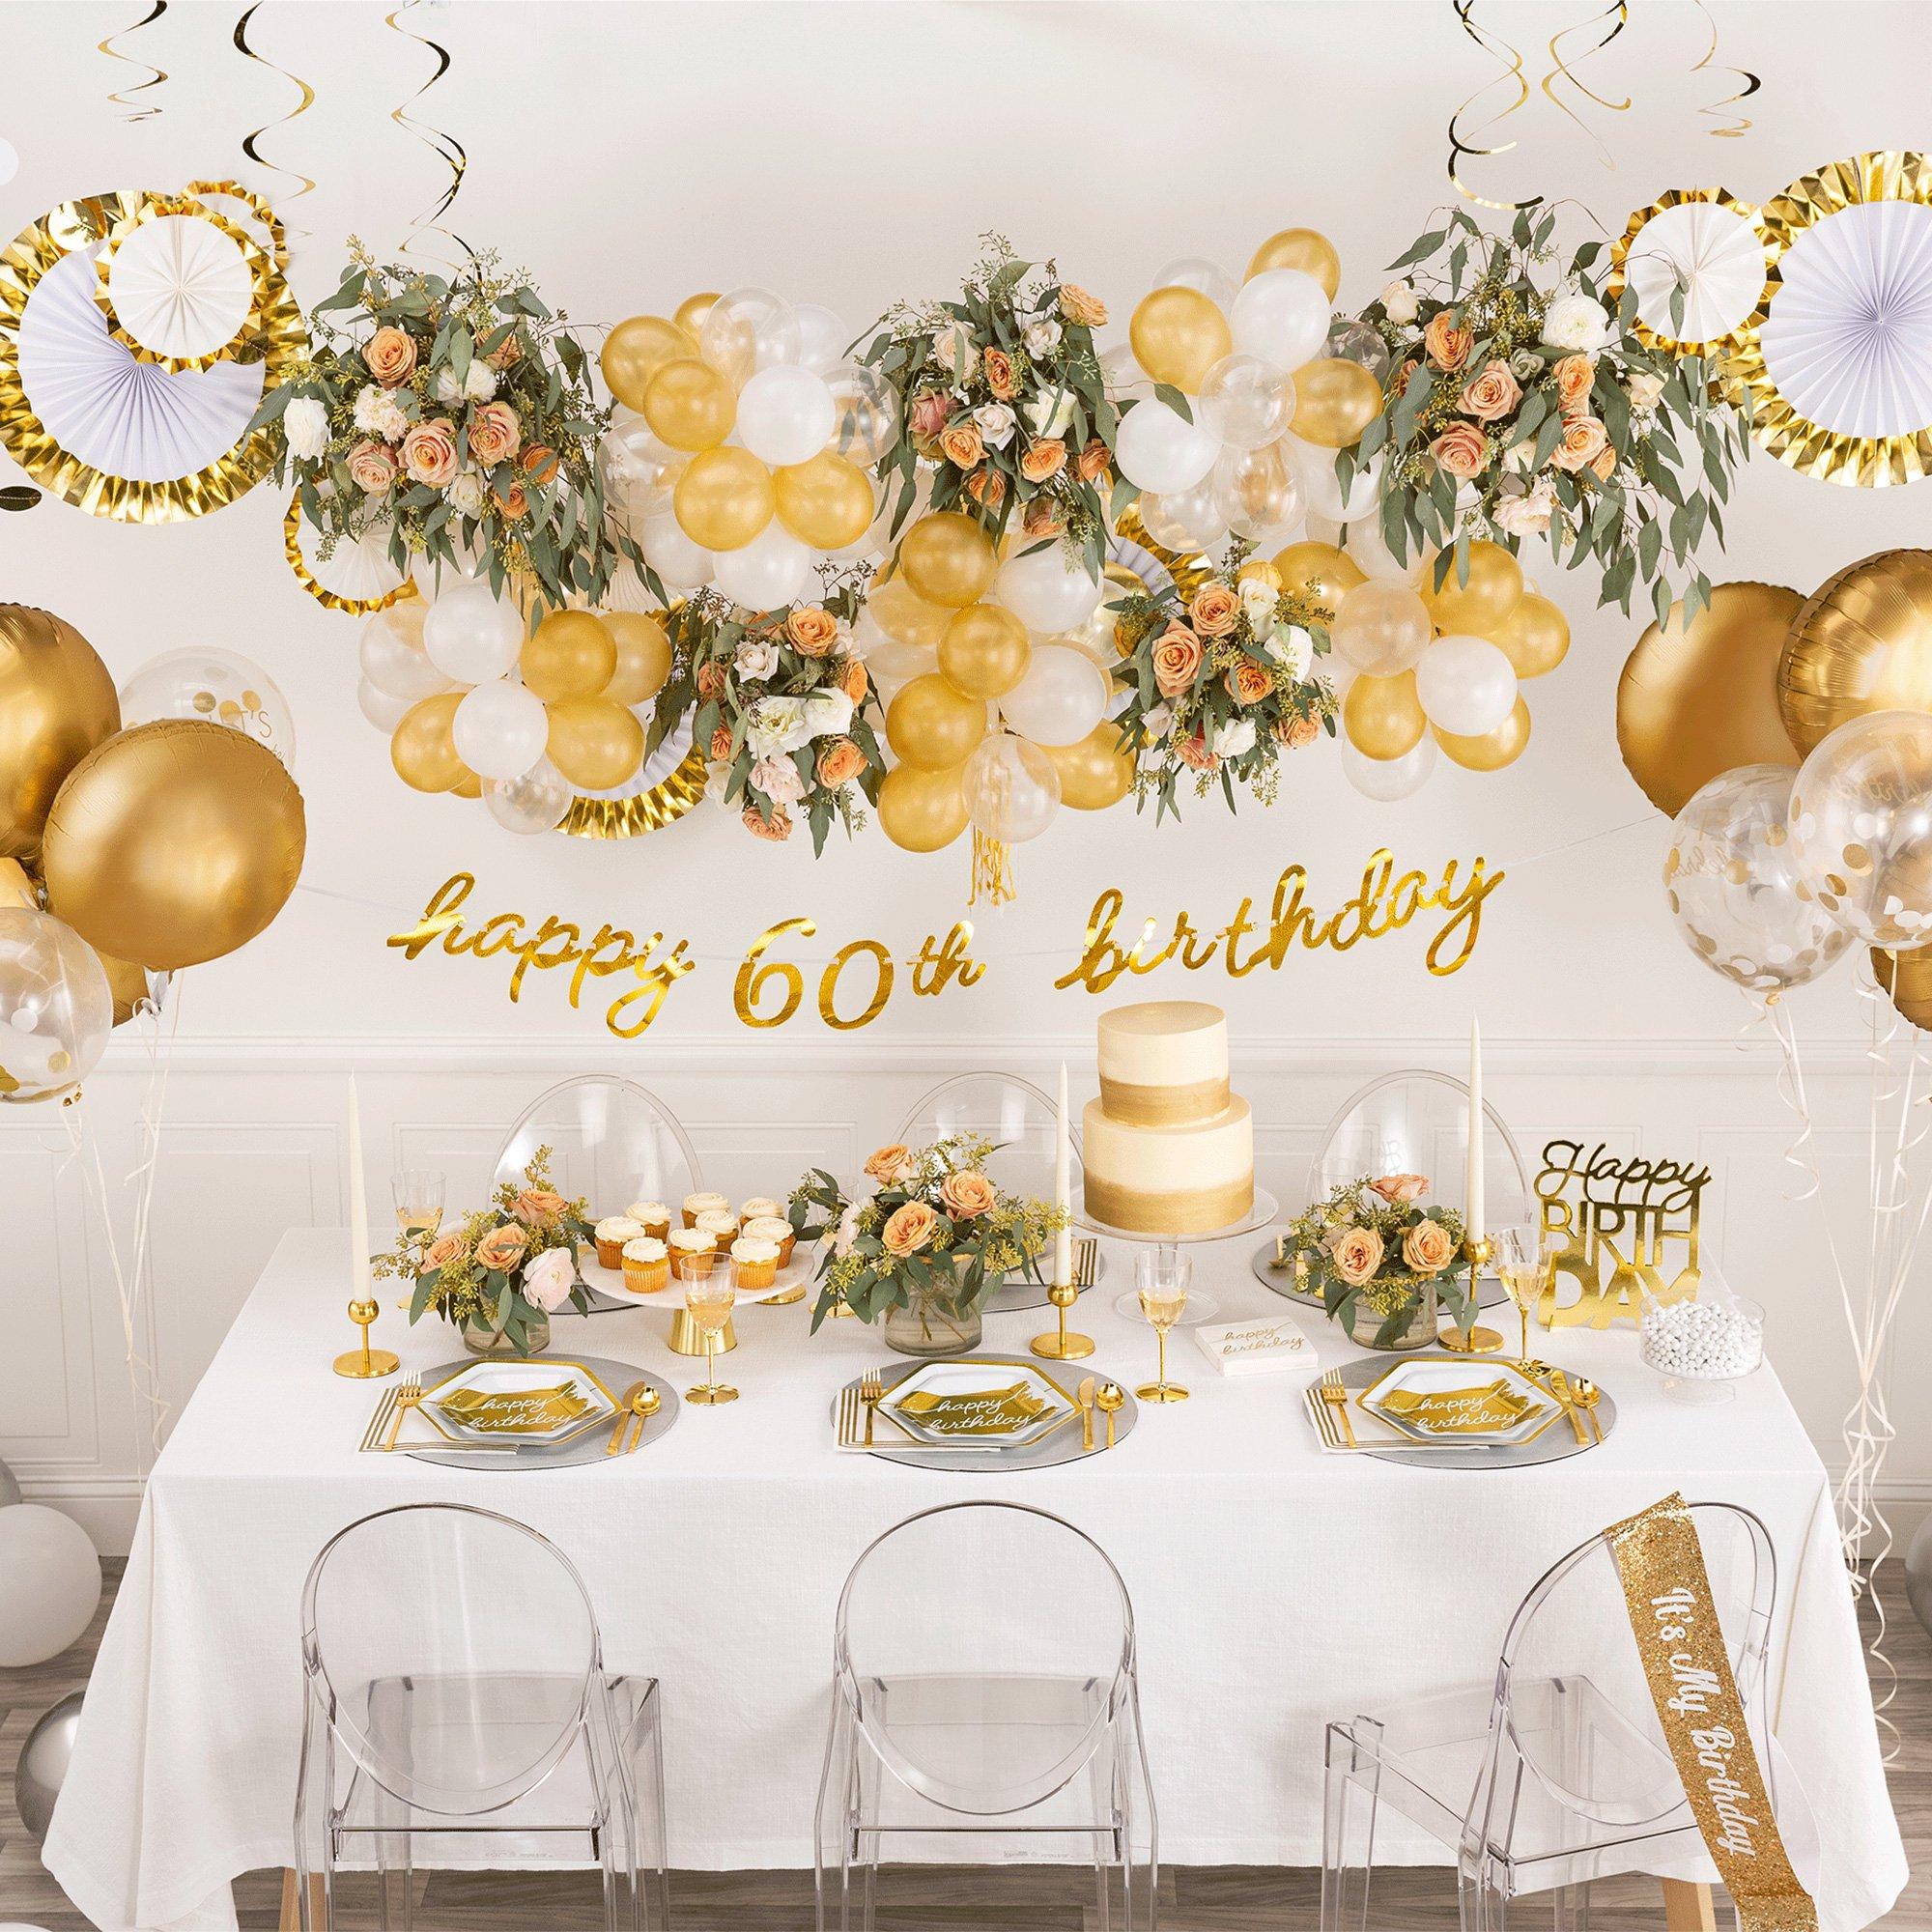 Vlucht Slepen melk Shop the Collection: Golden Age 60th Birthday Party | Party City